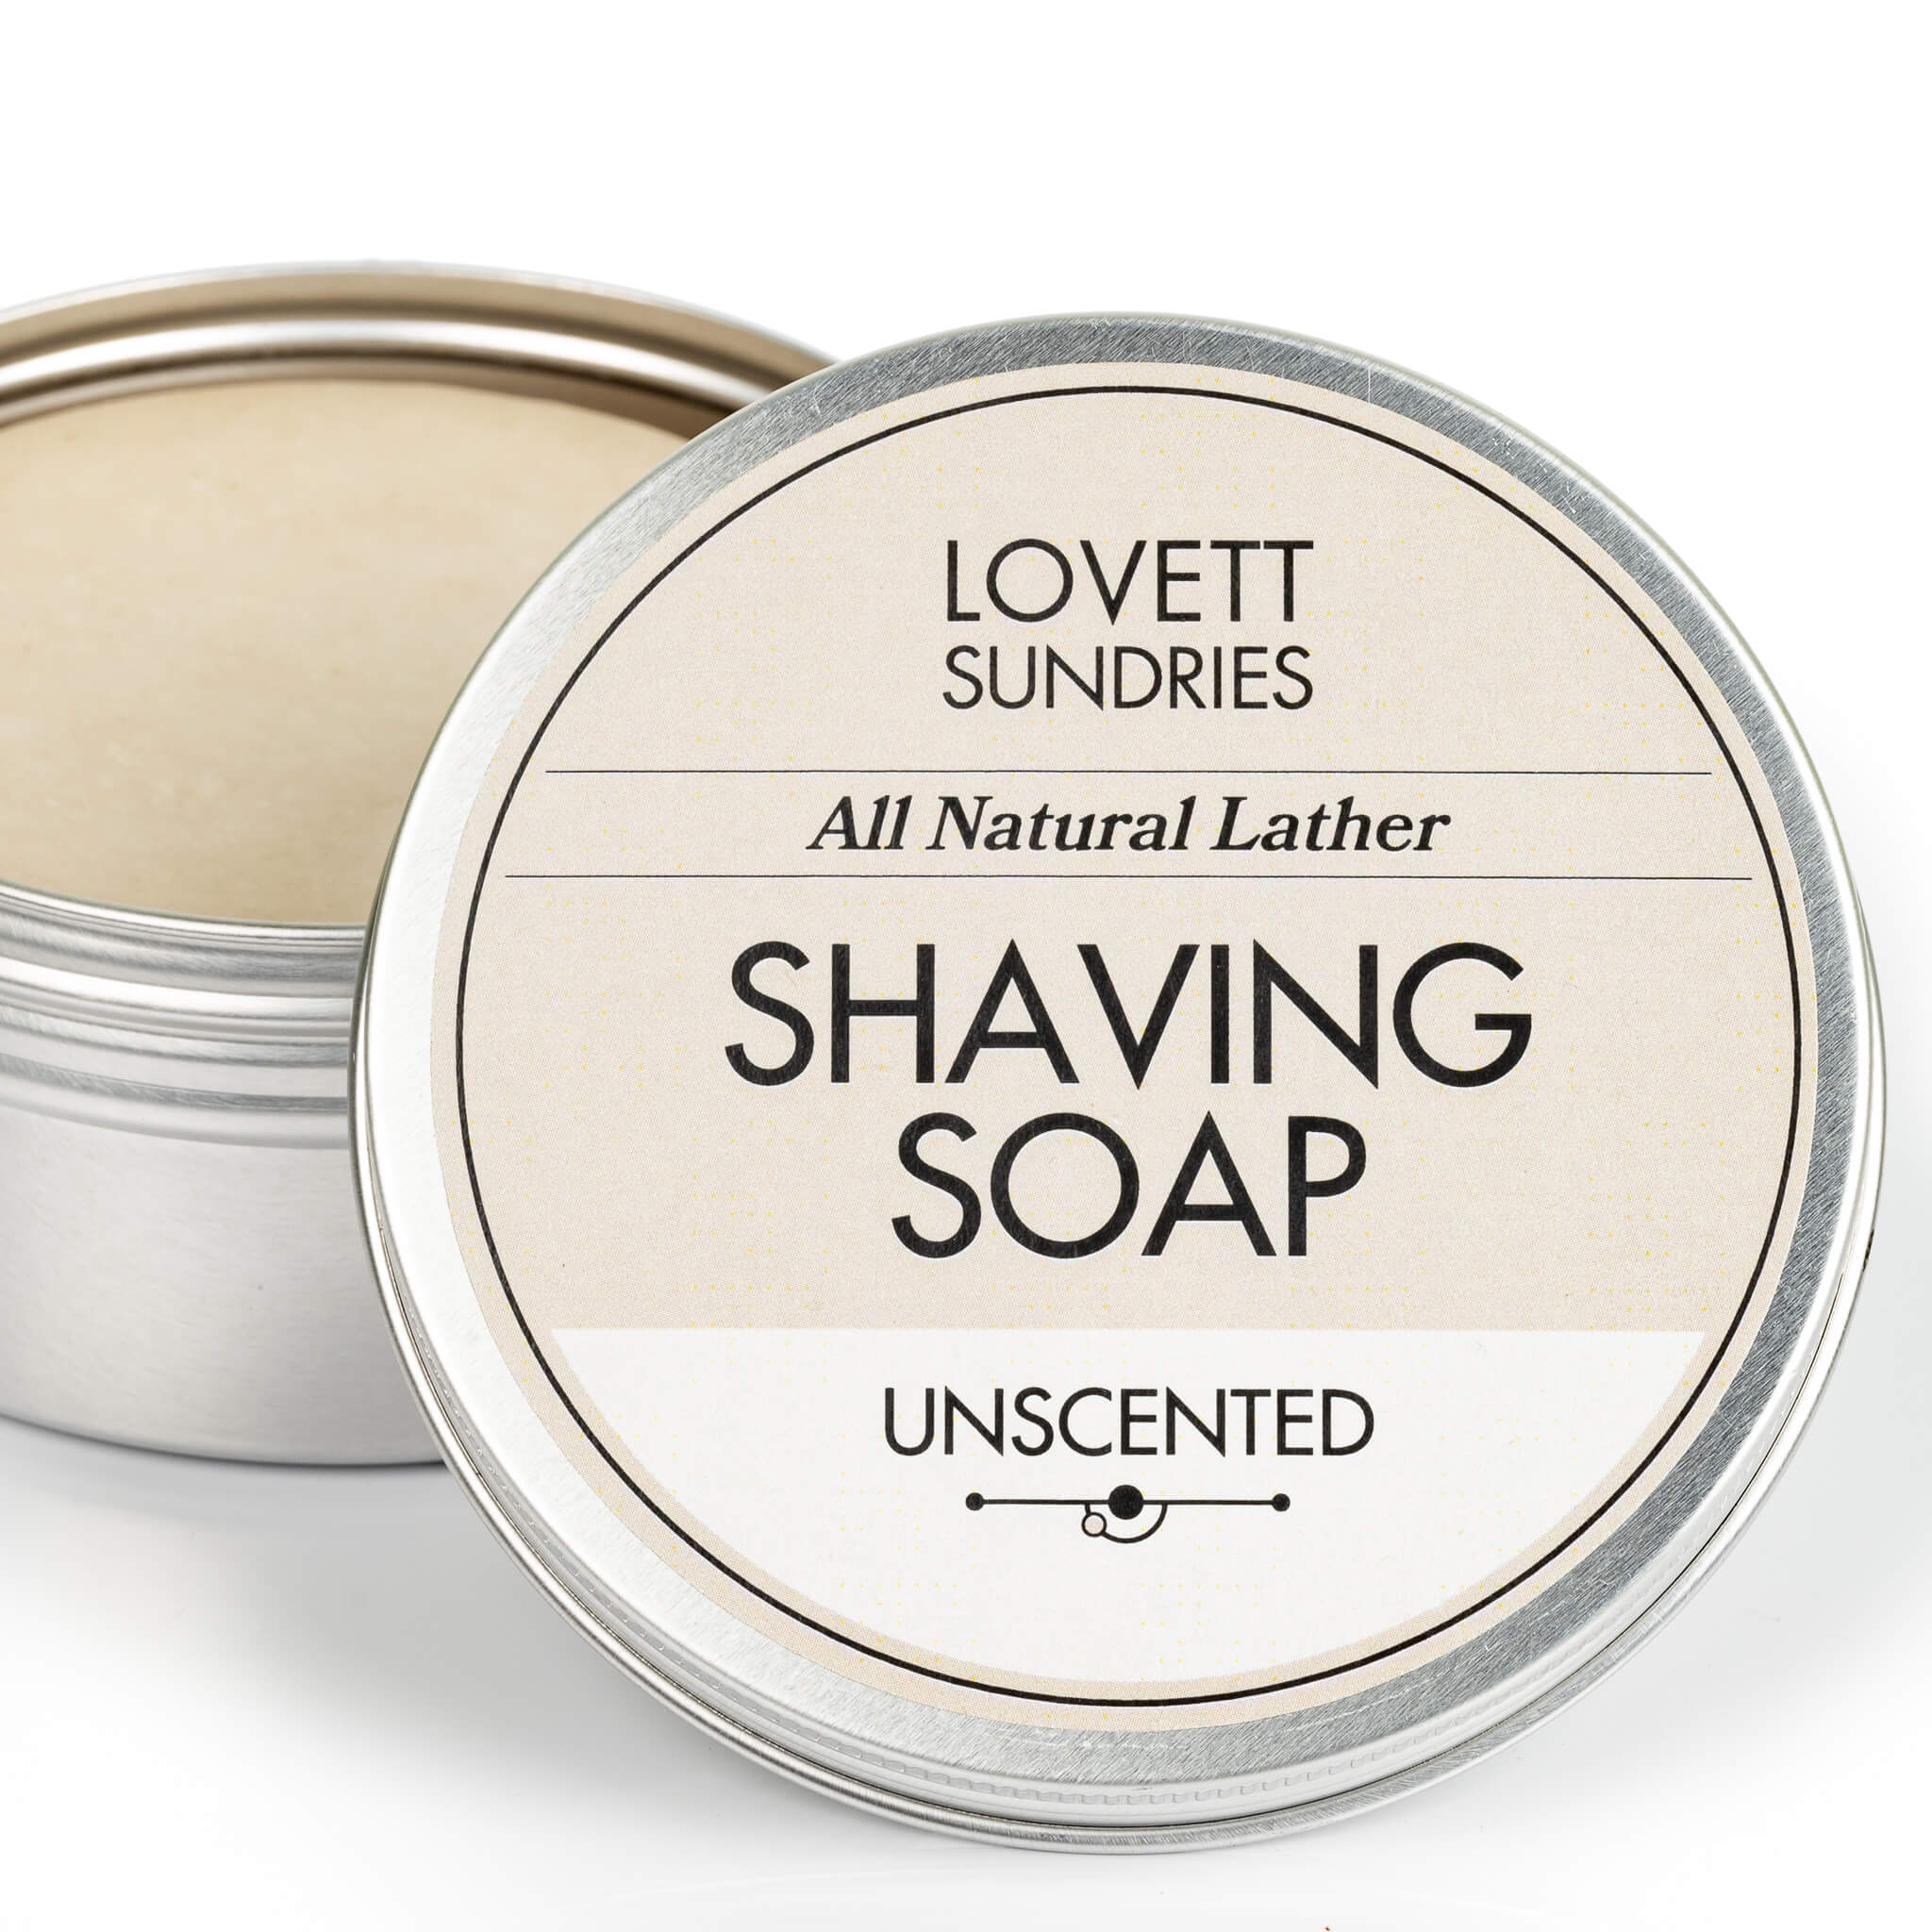 All natural good lathering unscented shaving soapscented shaving soap in a recyclable aluminum tin.